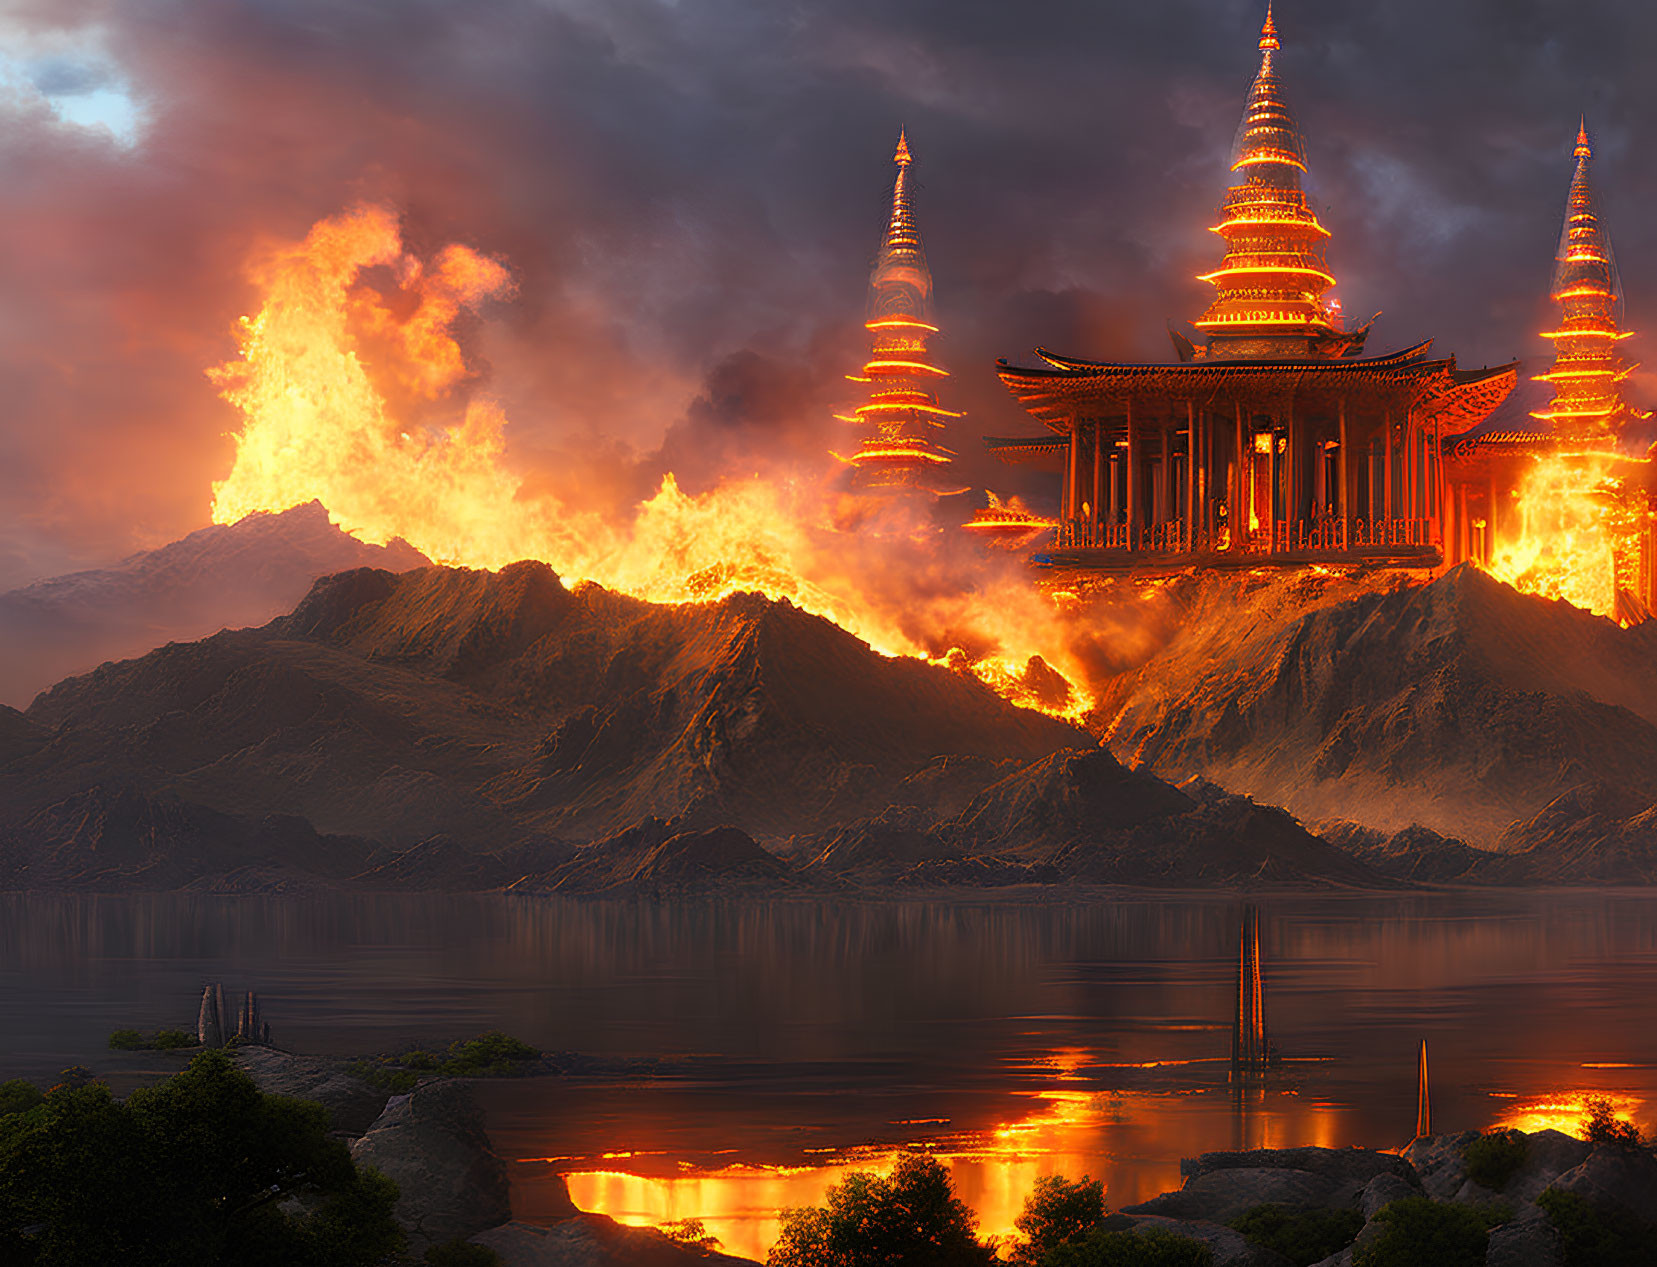 Fiery Mountains and Pagoda Reflecting in Tranquil Lake at Dusk